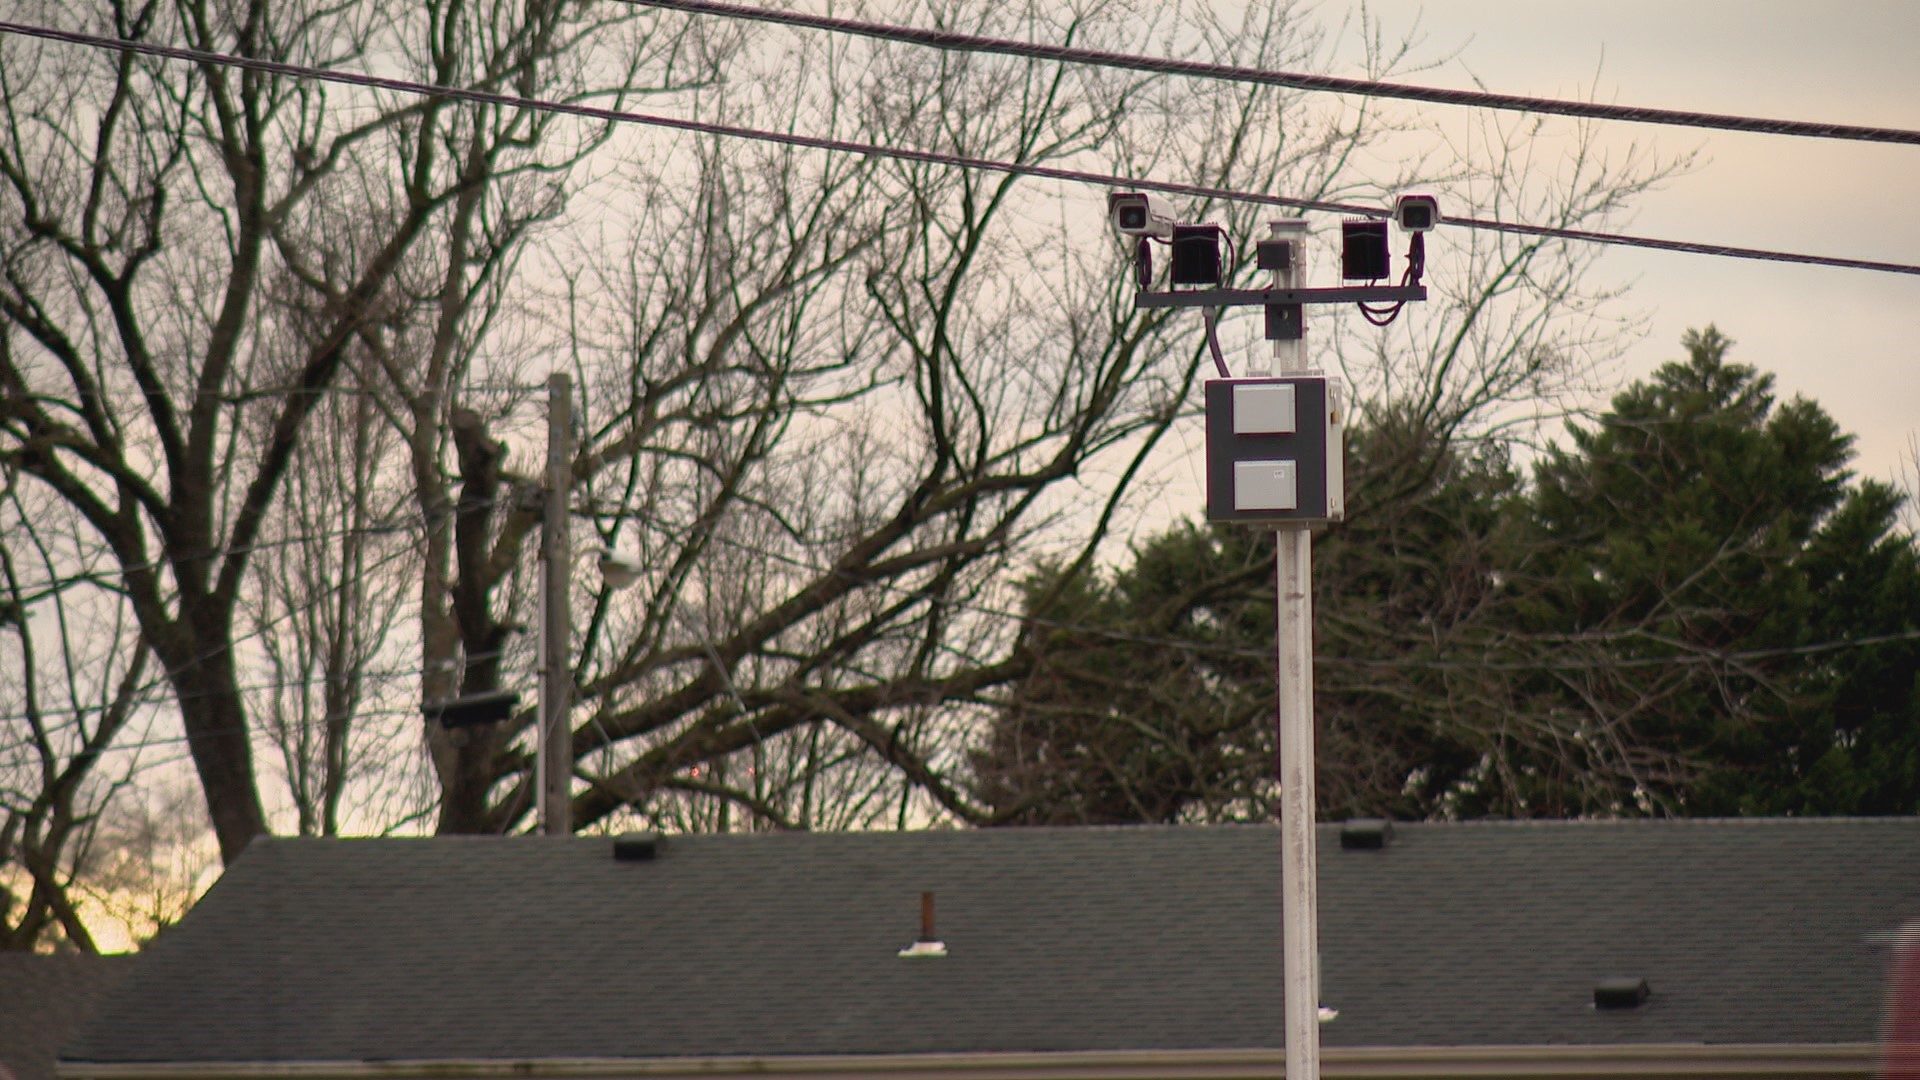 Two new cameras have gone live at Bridge Road and College Drive, as well as Bridge Road and Harbour View Boulevard.